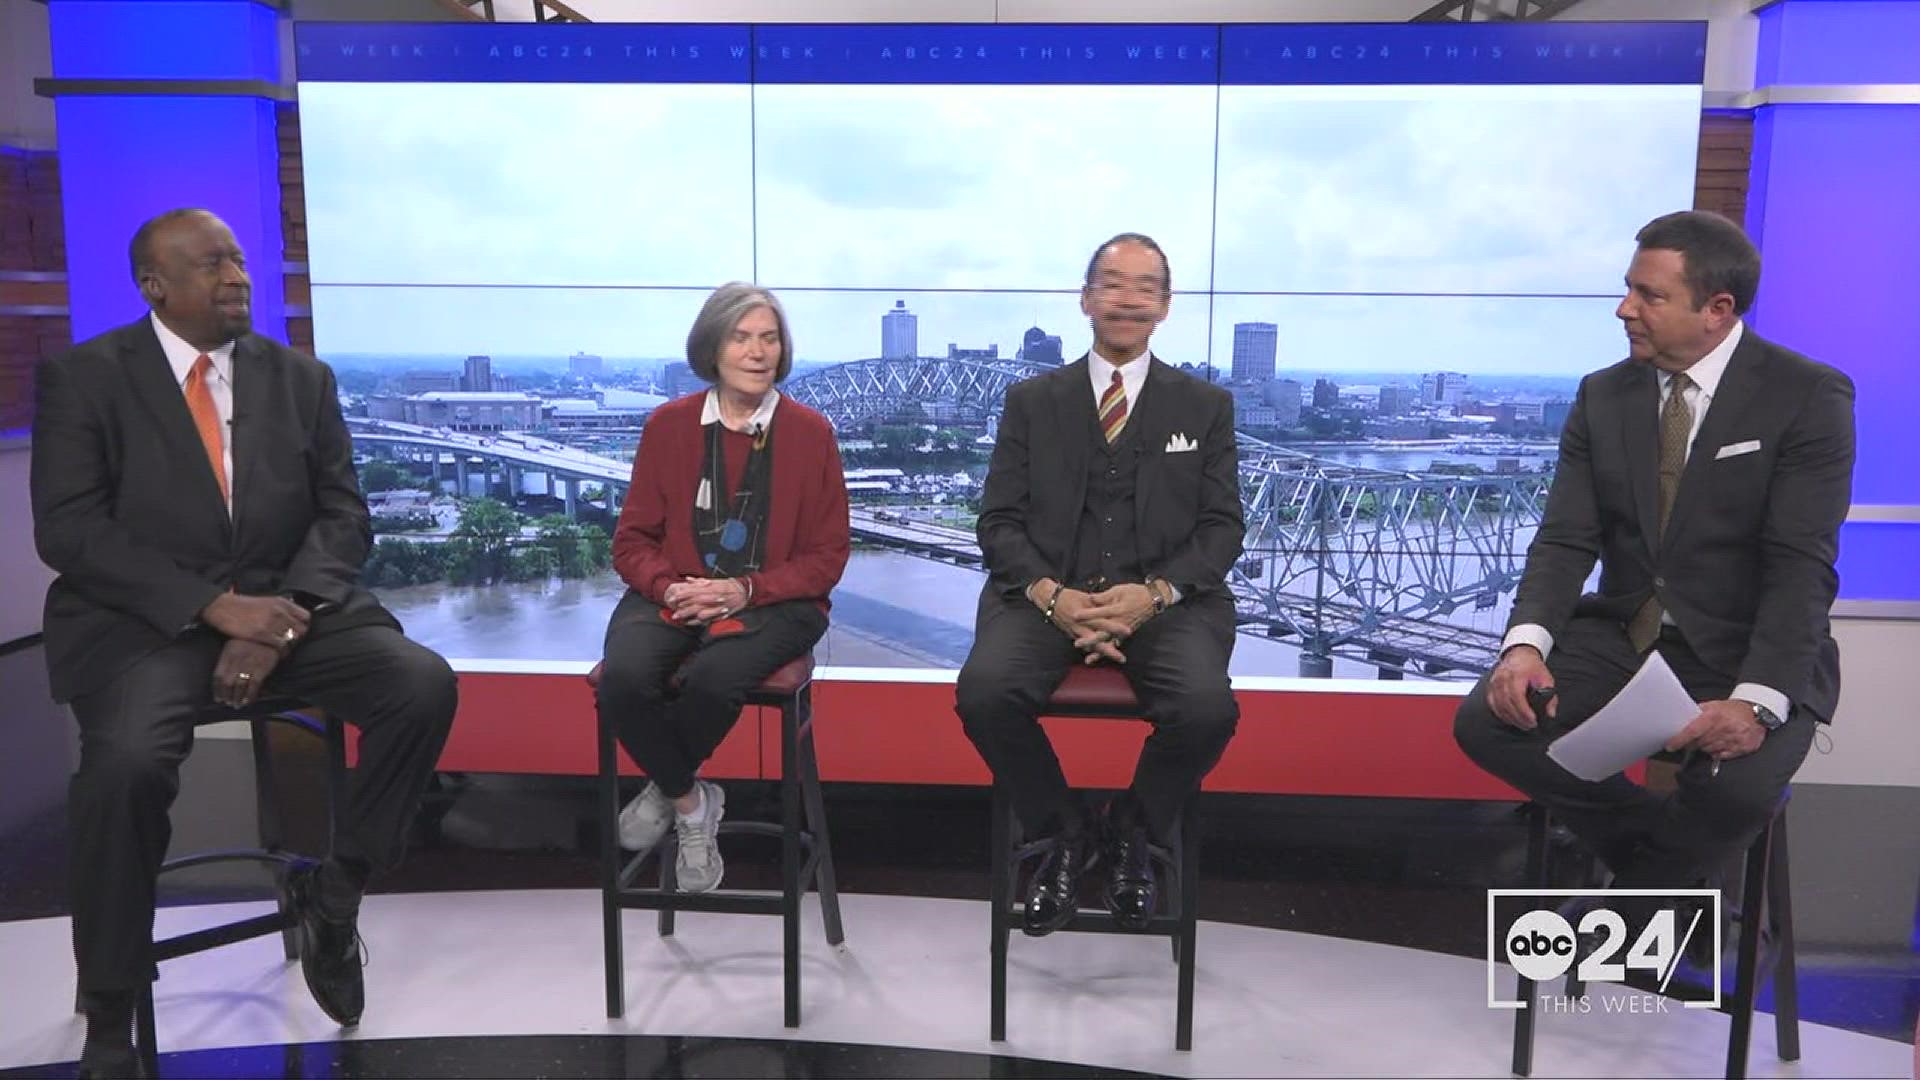 Each member of the ABC24 This Week panel shared who, for better or worse, was the biggest turkey of 2022.